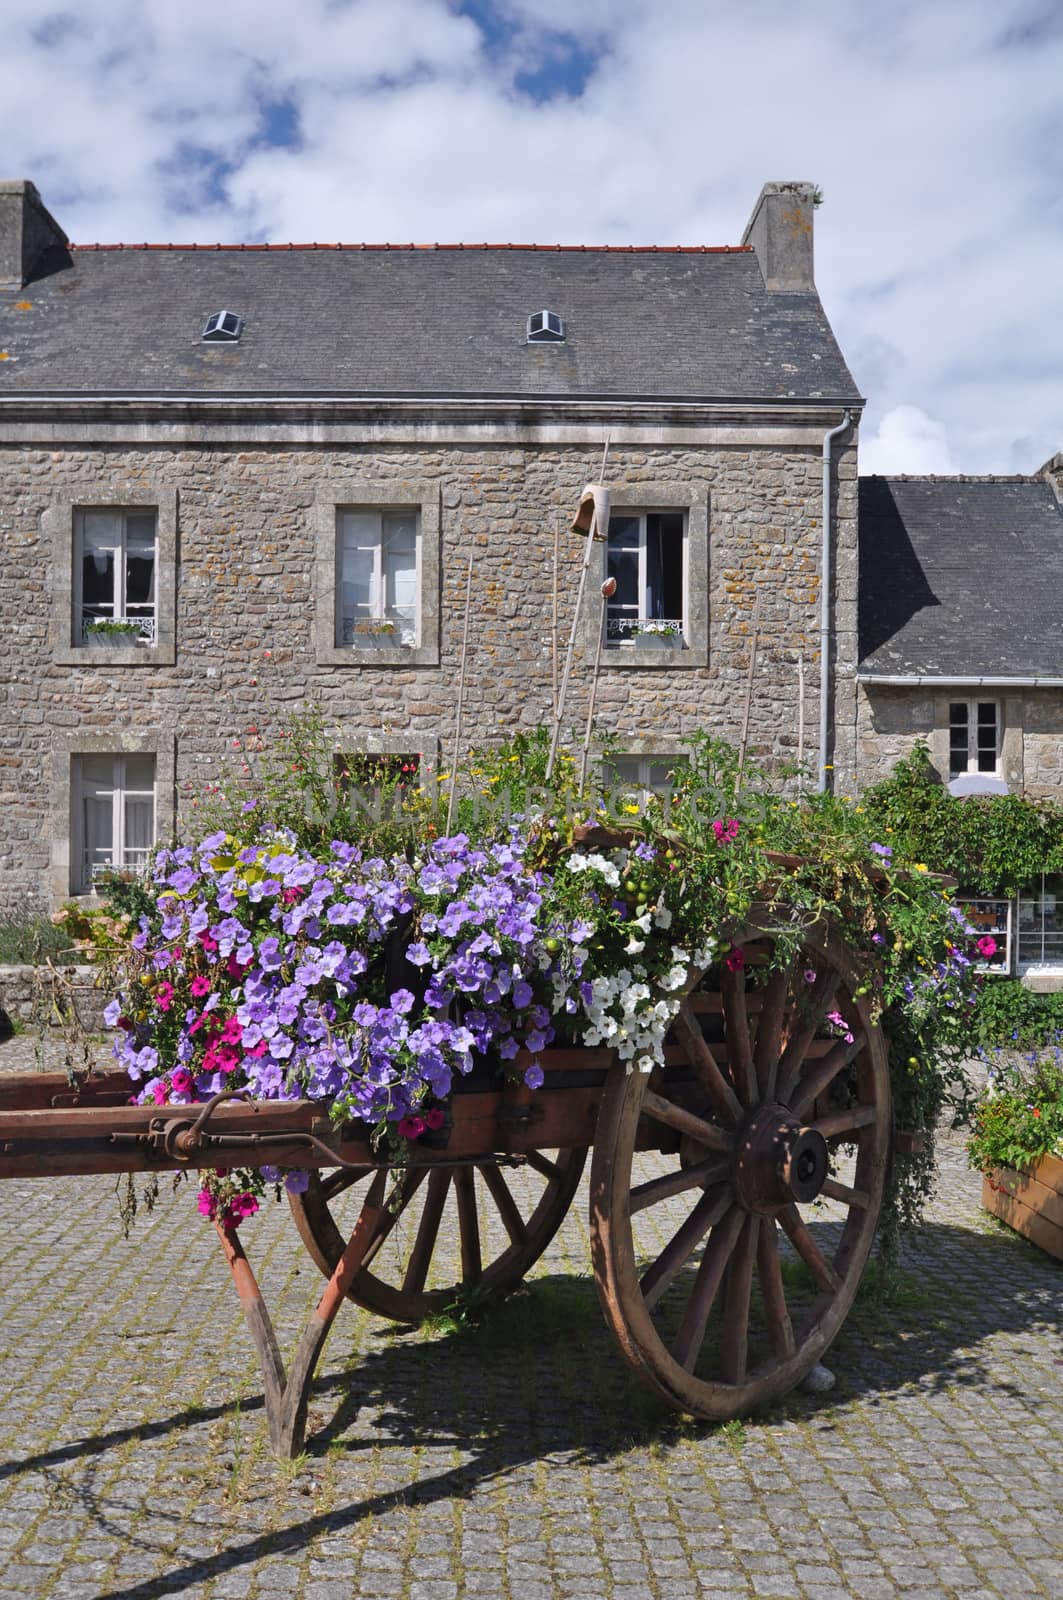 Floral display in an old wooden cart, in the village of Locronan, in Brittany, rural France